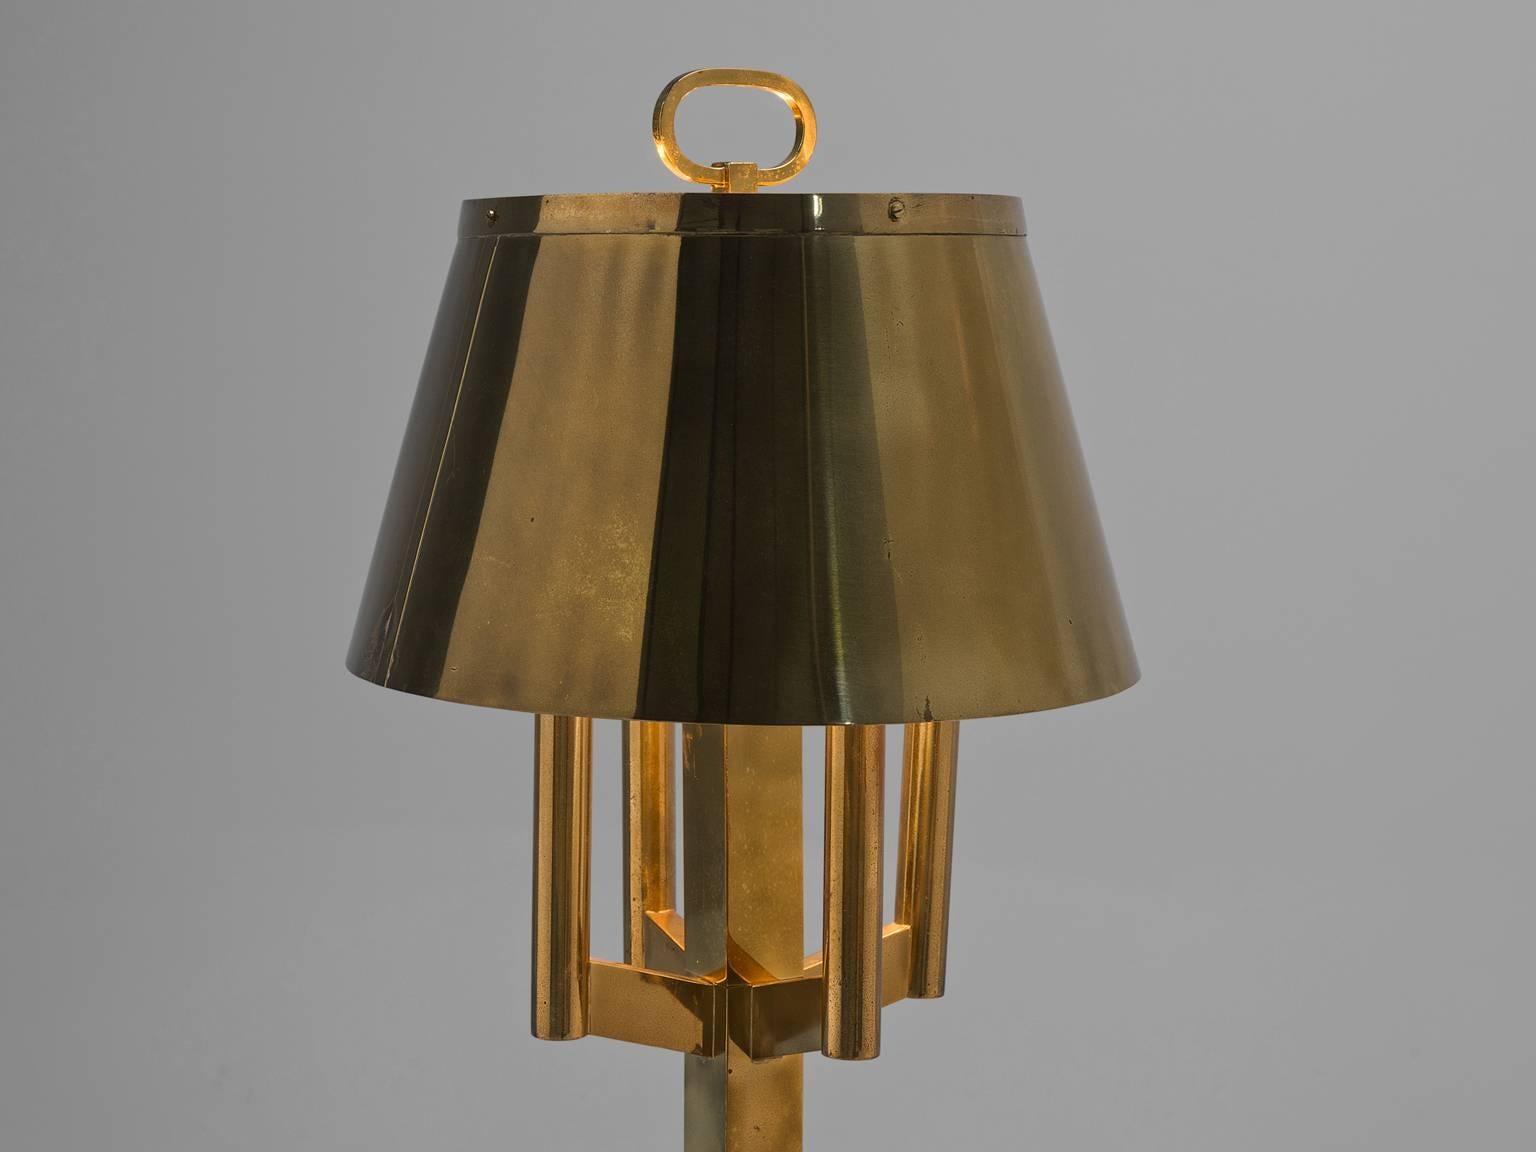 1940's table lamps